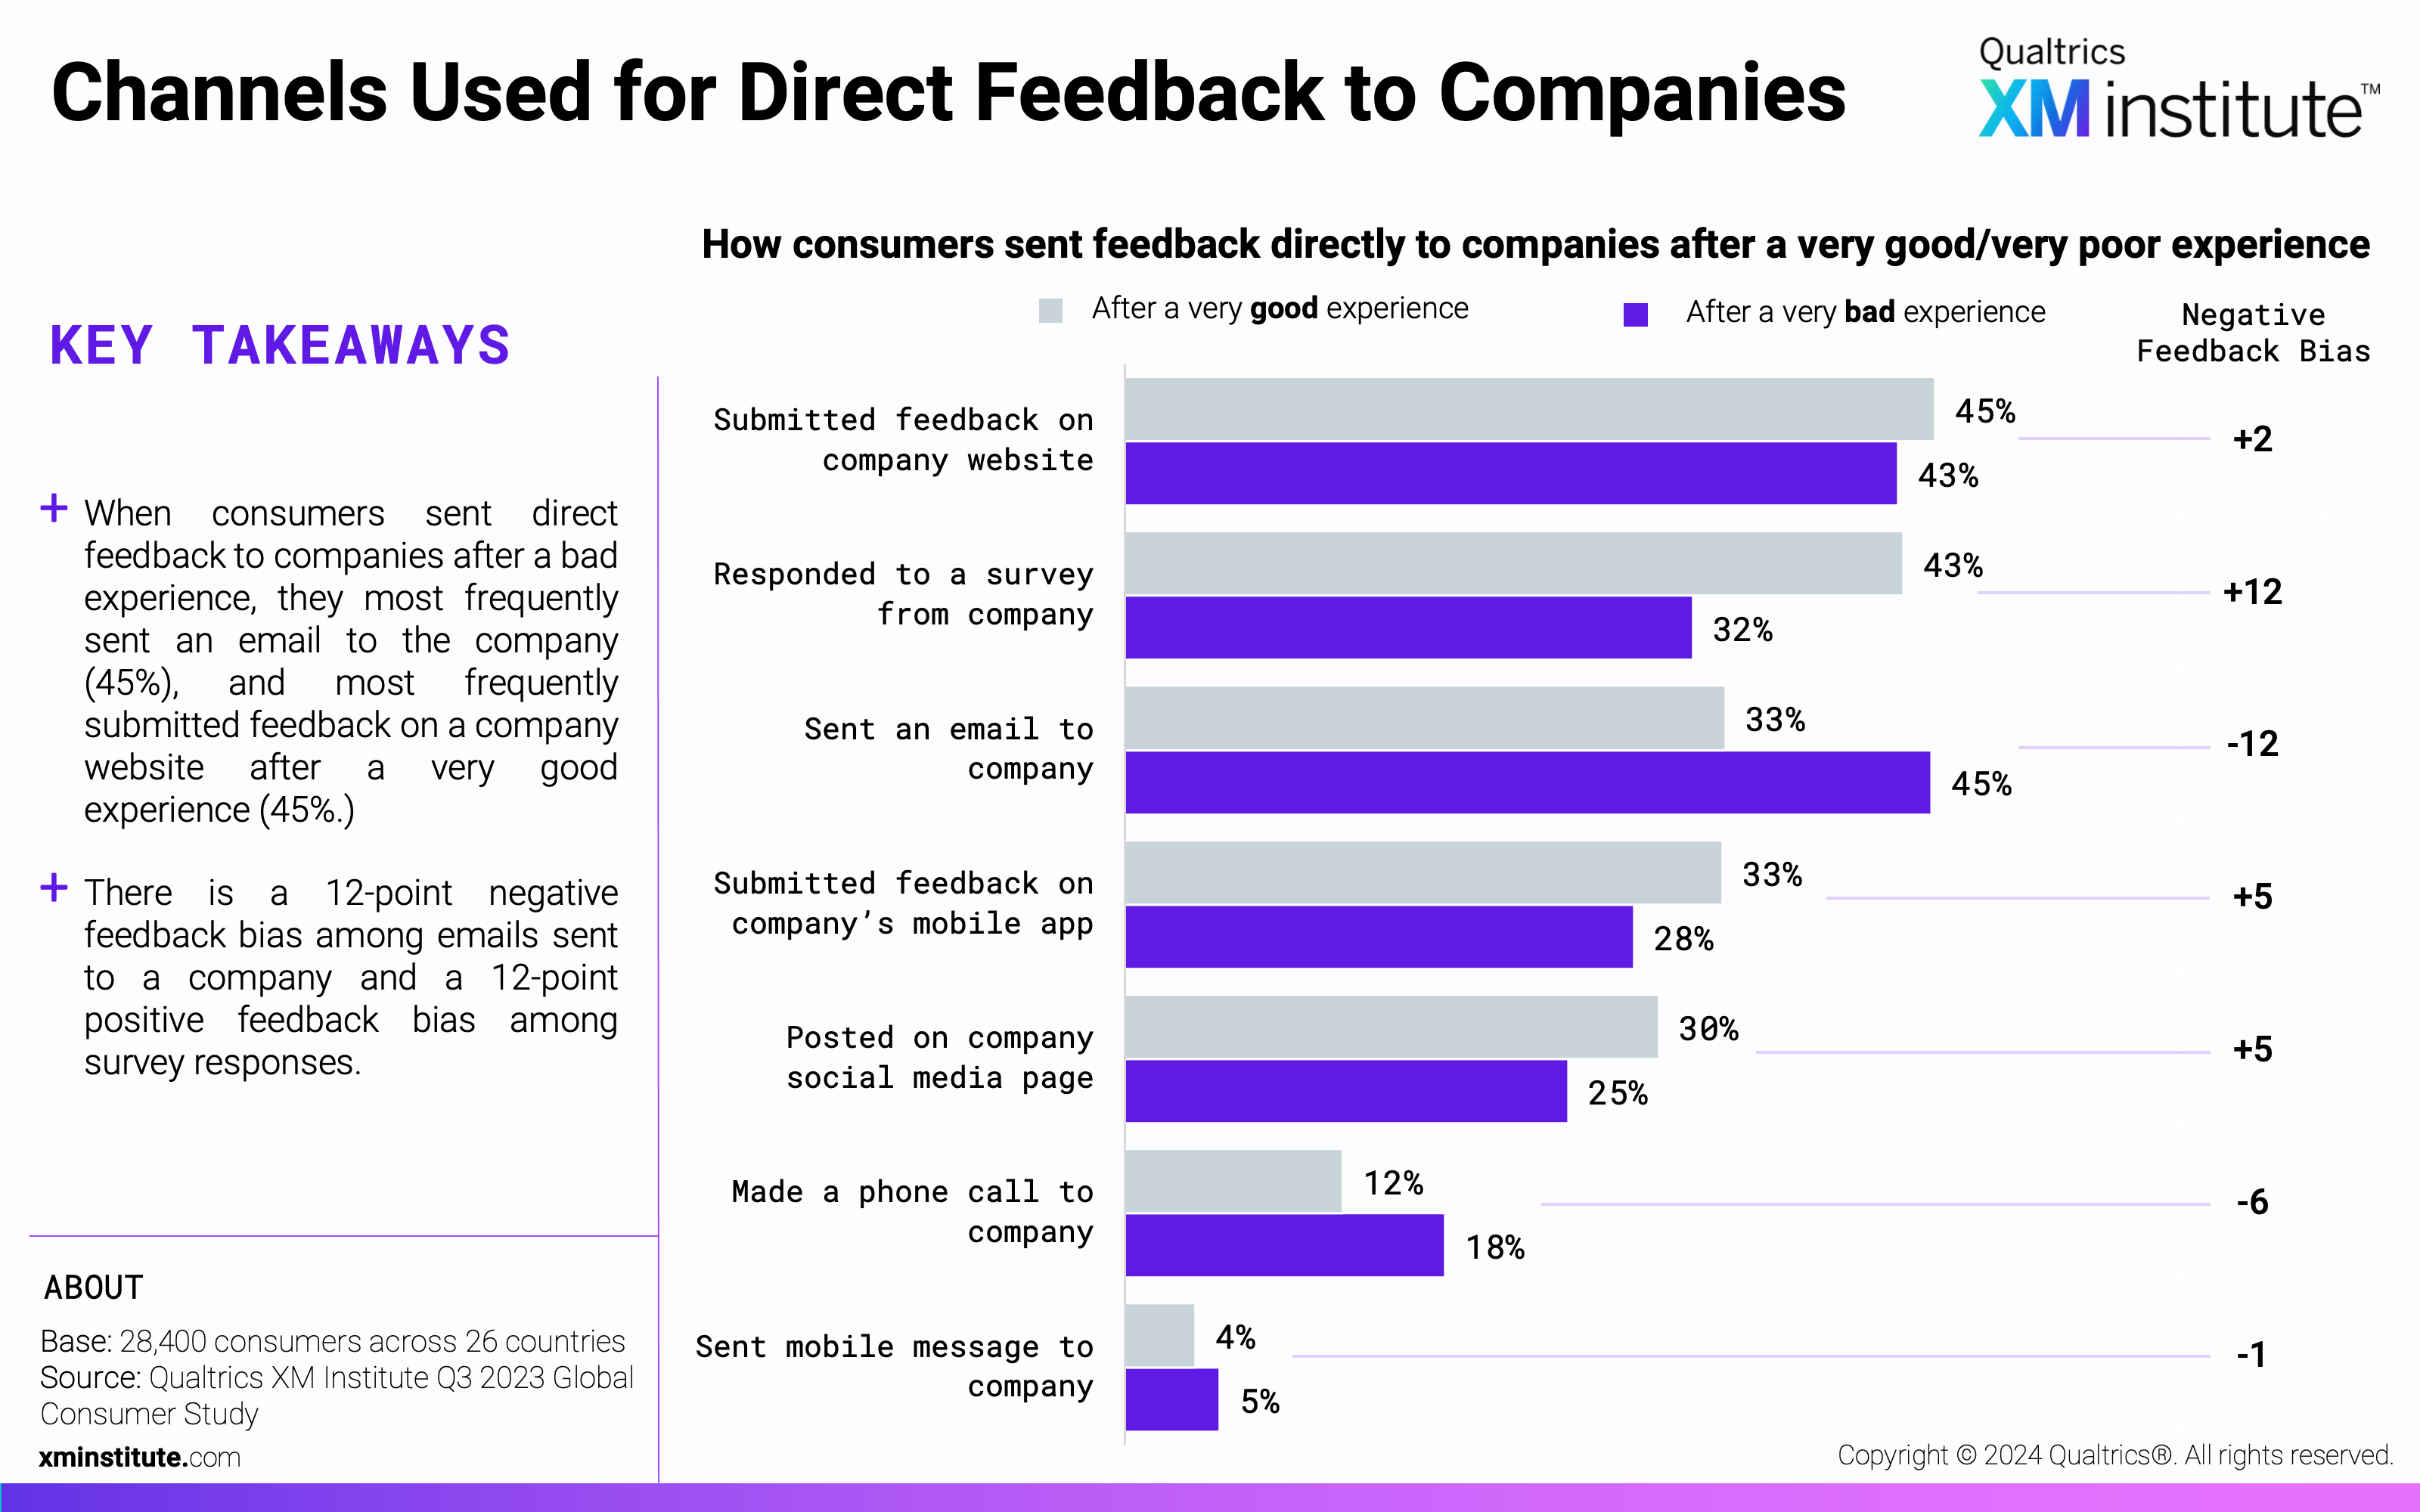 This chart shows the percentage of consumers that shared feedback directly with a company using each channel after a very good versus after a very bad experience. 